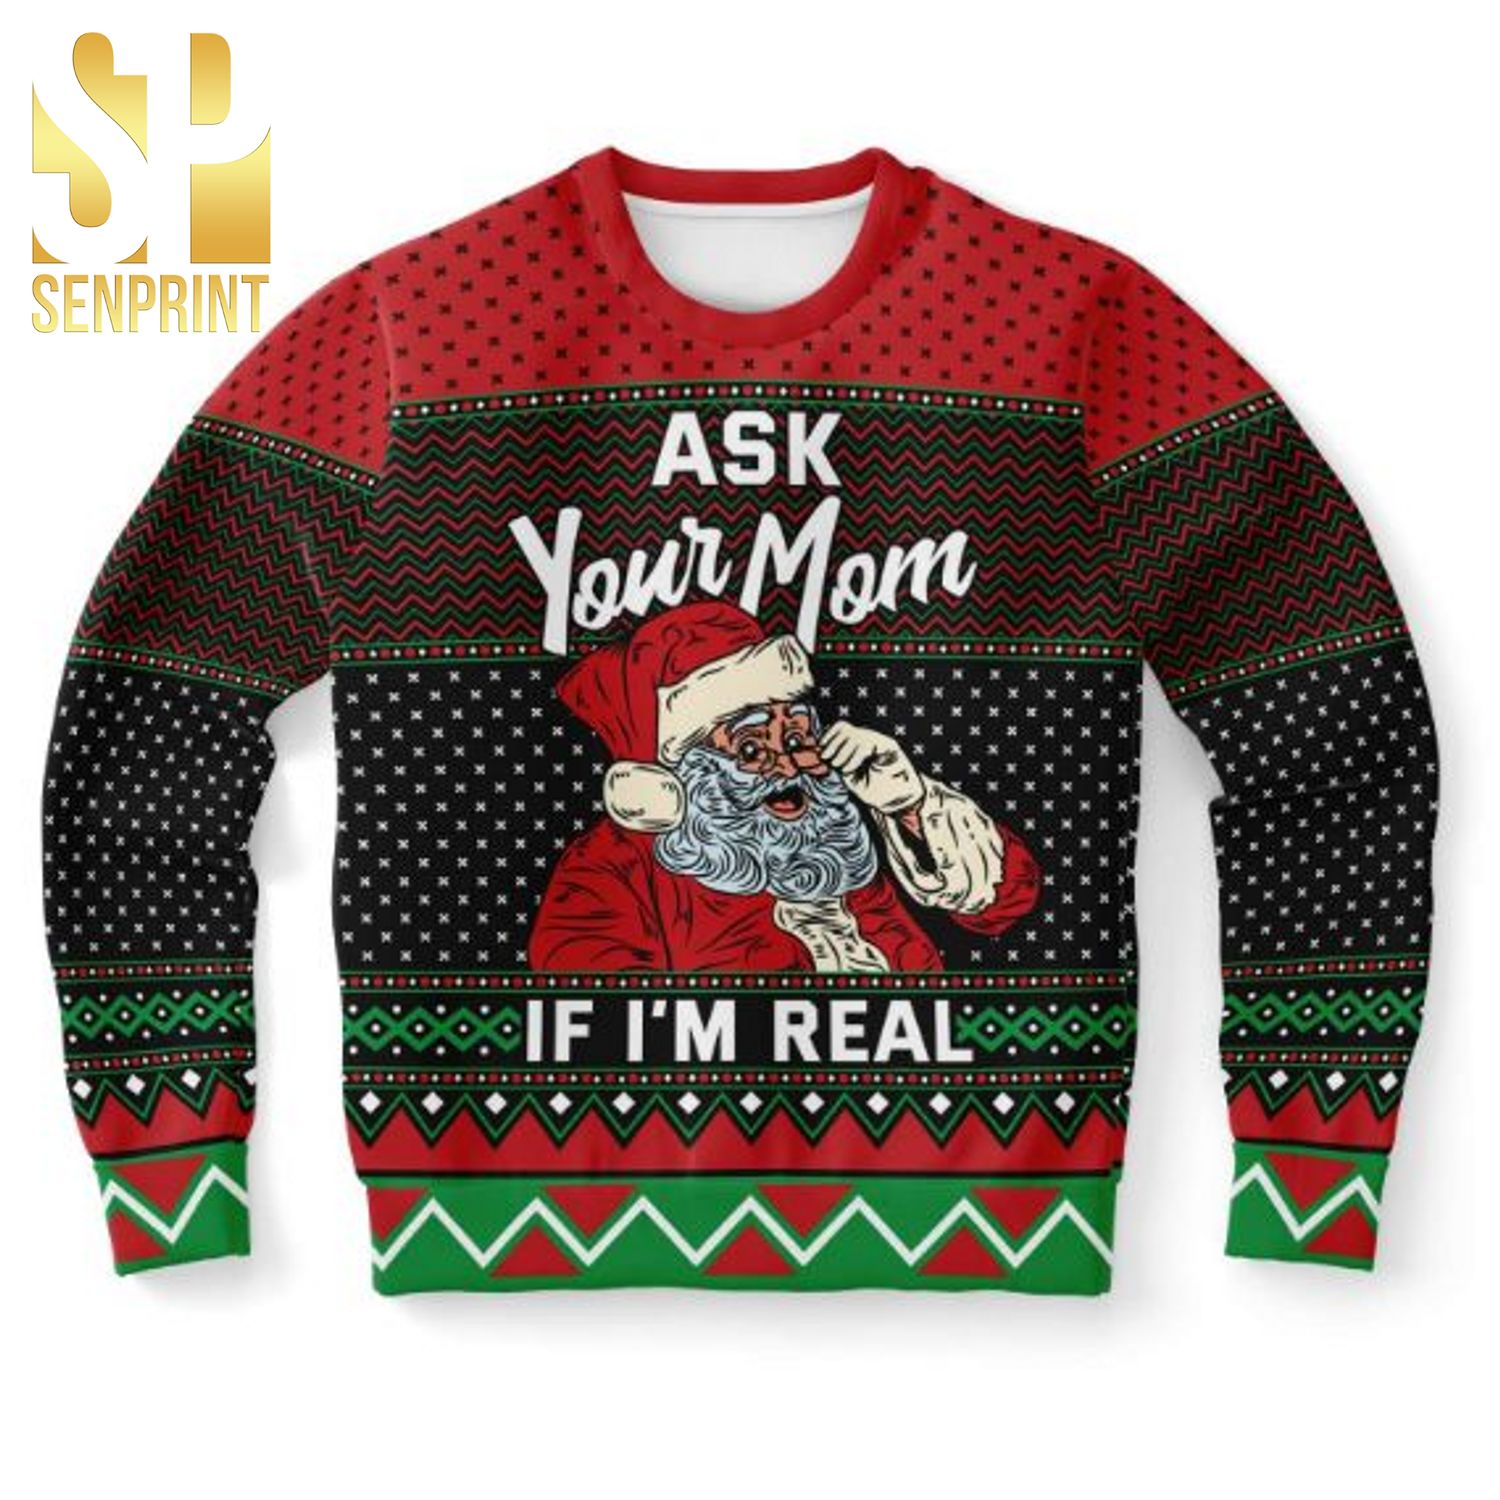 Ask Your Mom If I’m Real Ugly Christmas Wool Knitted Sweater